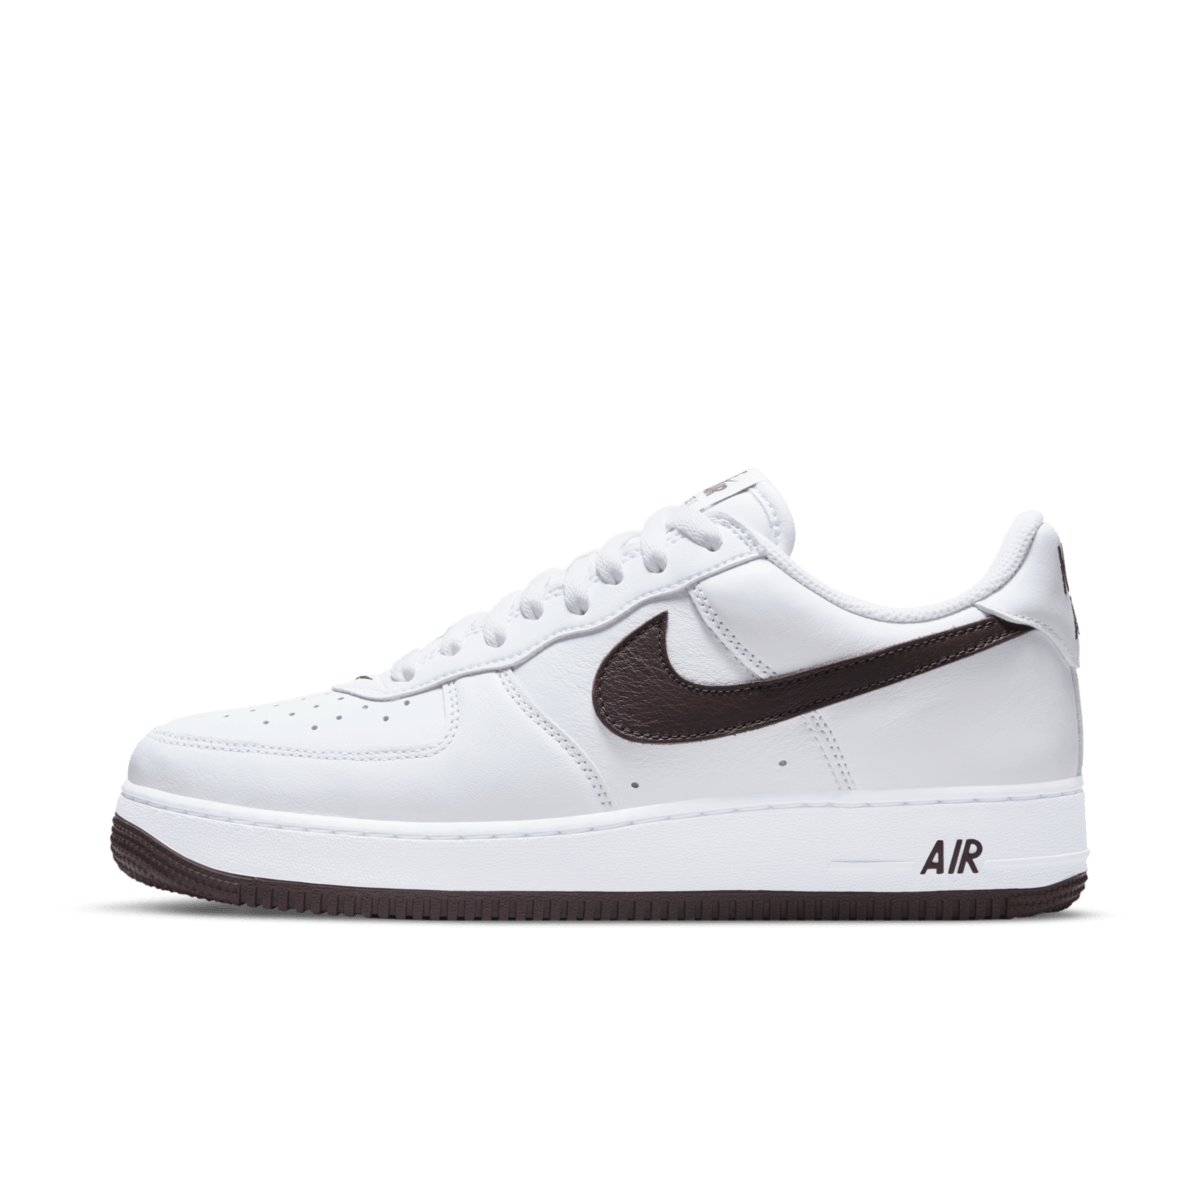 Nike Air Force 1 Low 'Chocolate' - Color of the Month DM0576-100